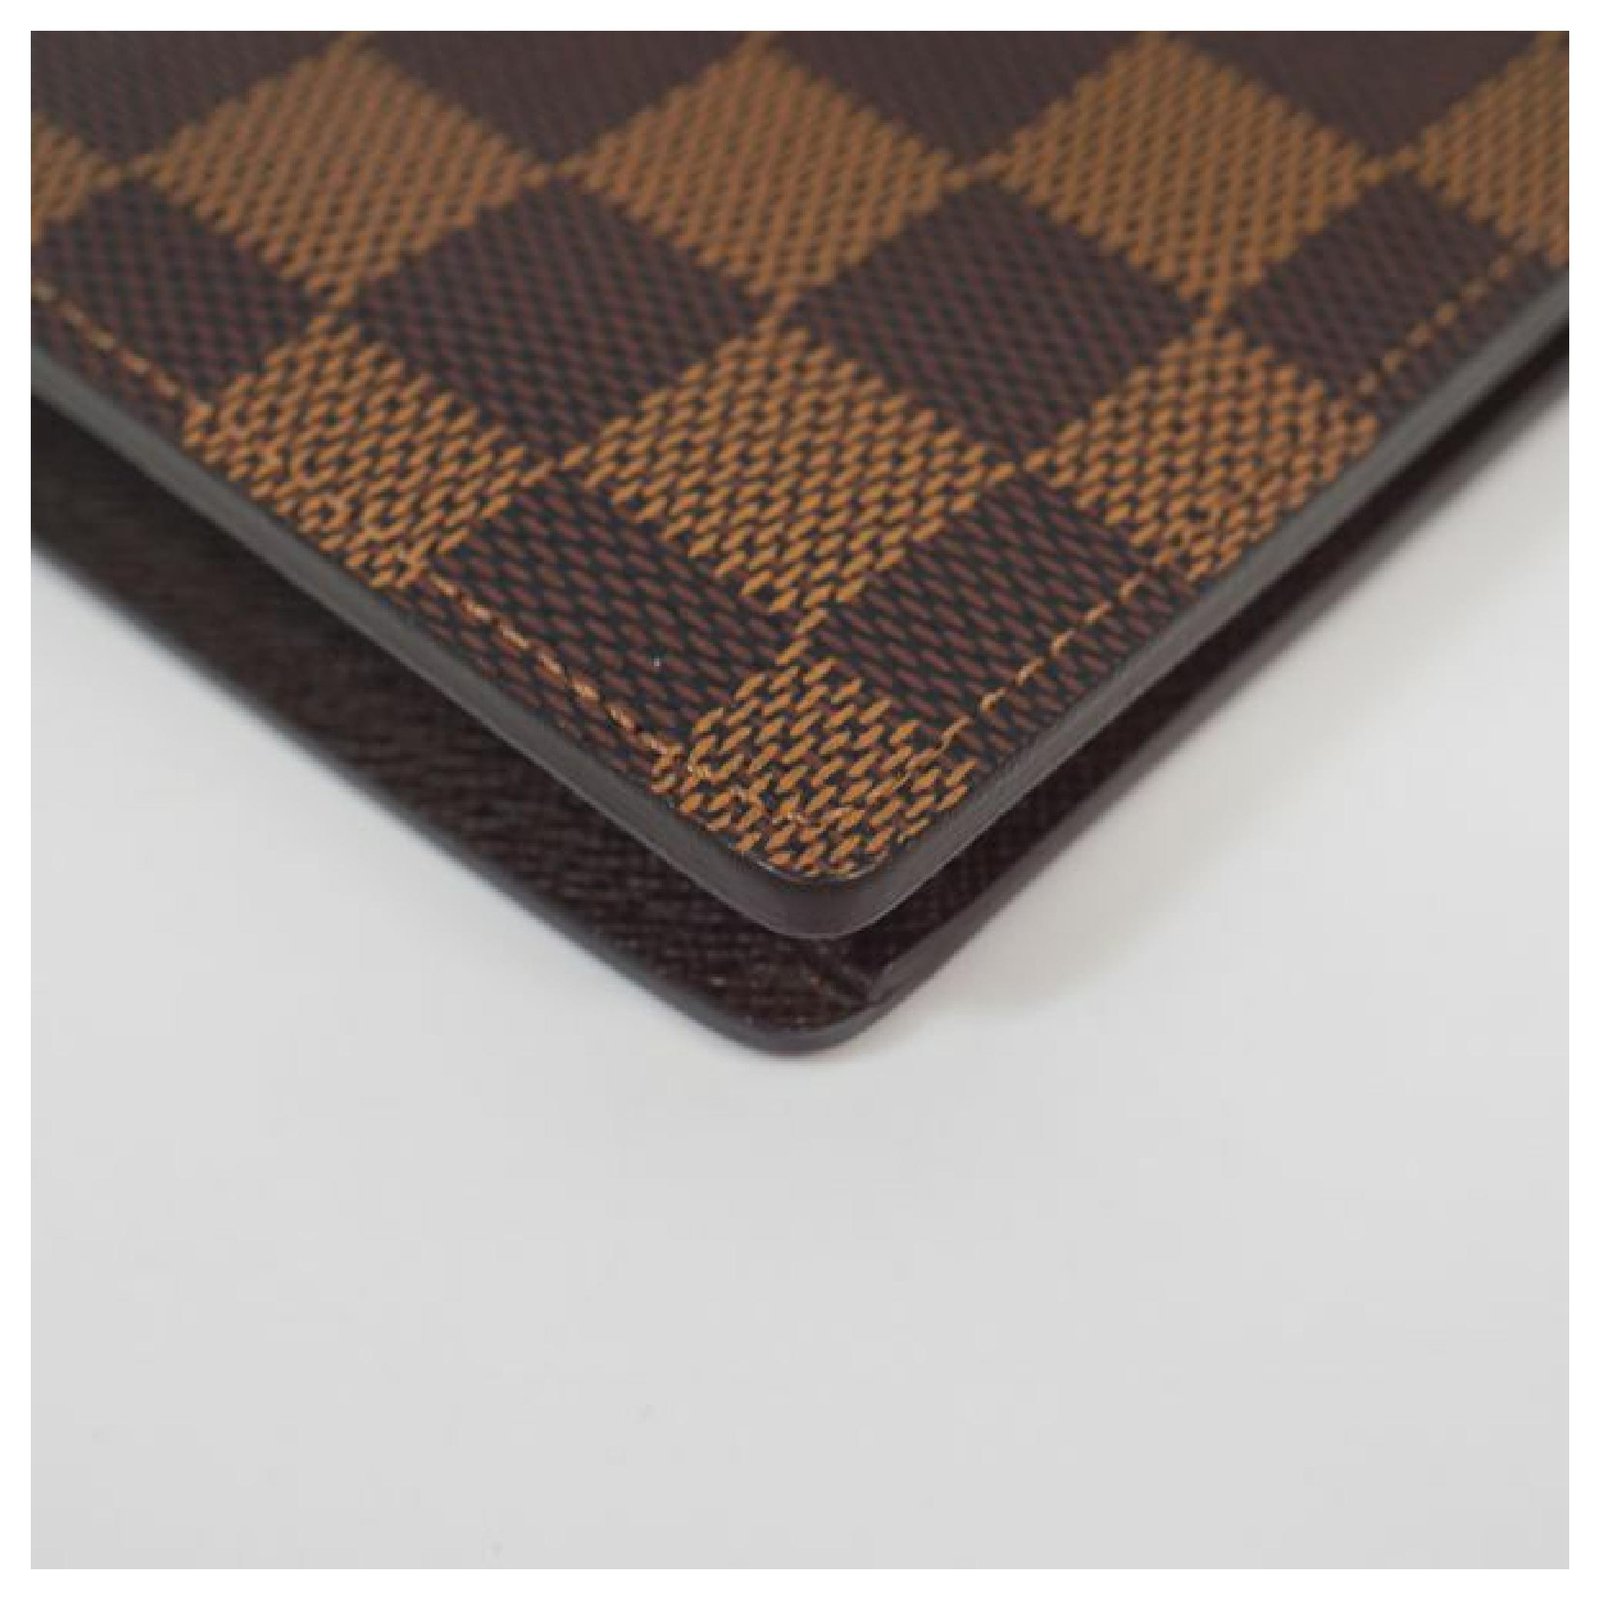  Louis Vuitton N60017 Men's Long Wallet, Damier, Brown,  Portfeuil, Brazza, [Parallel Import], Braun : Clothing, Shoes & Jewelry